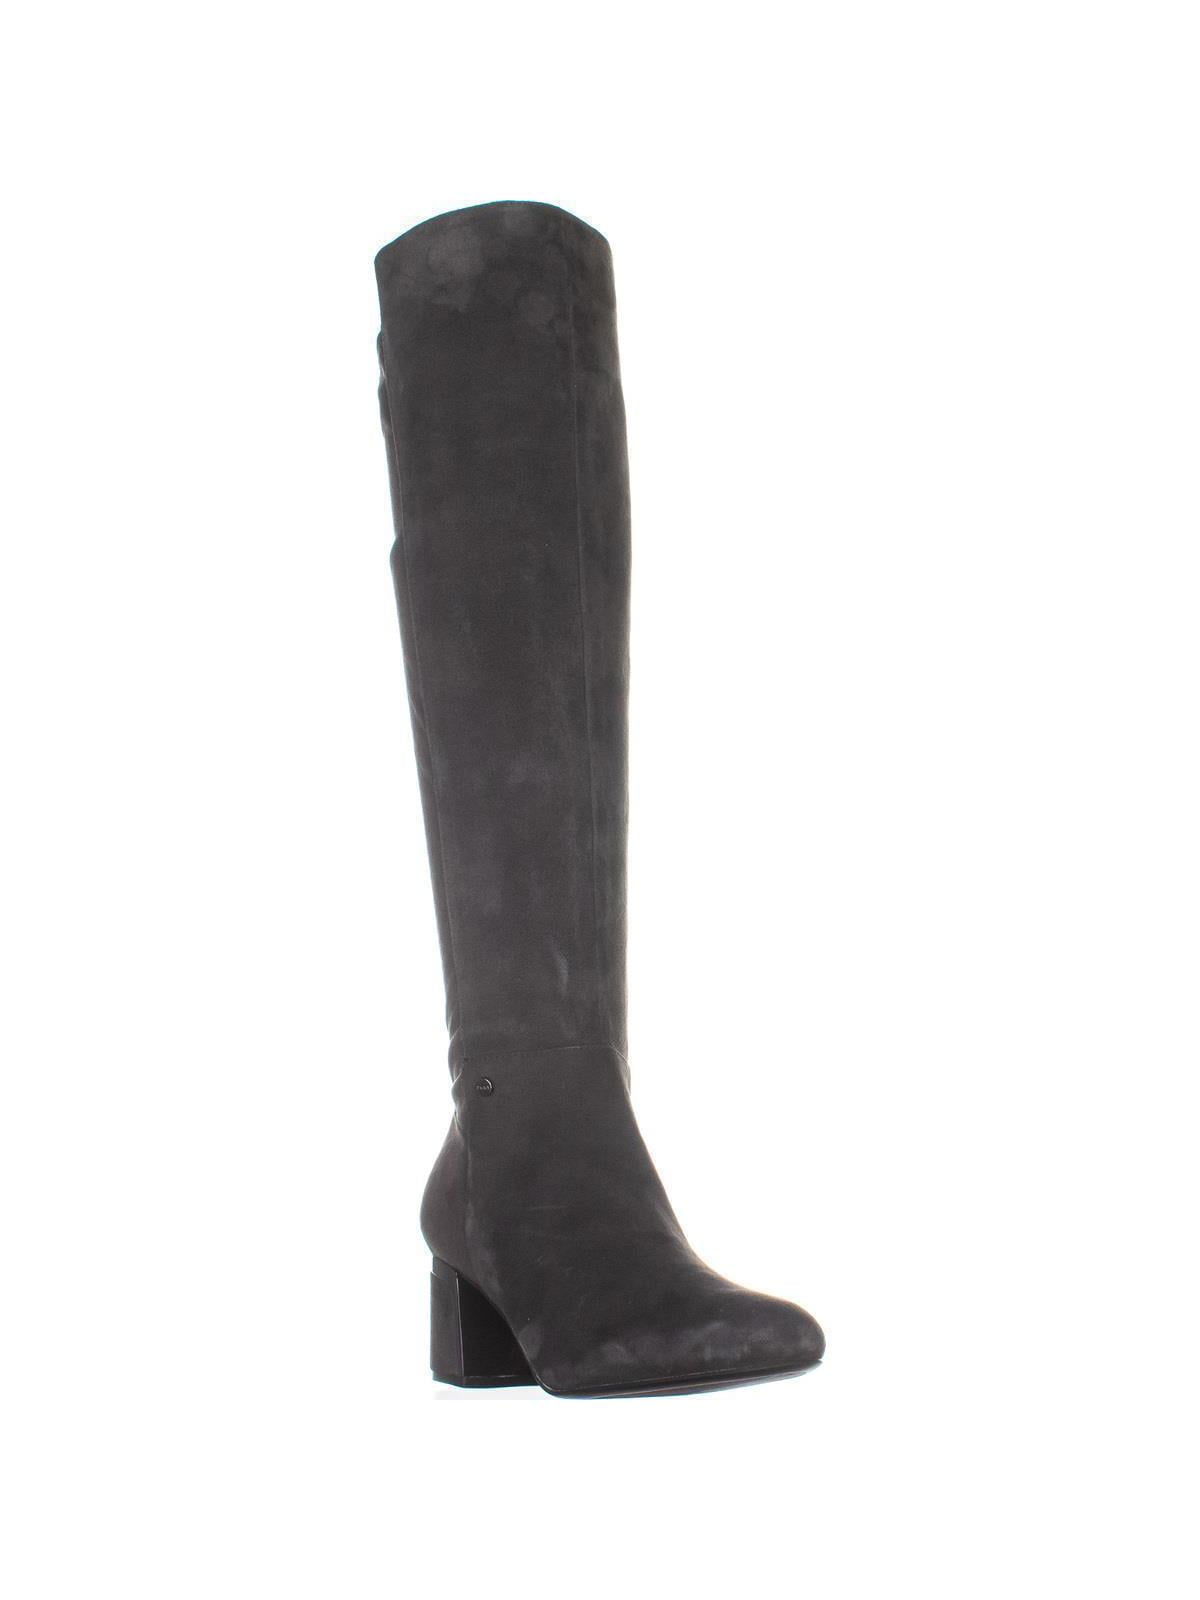 gray suede knee high boots